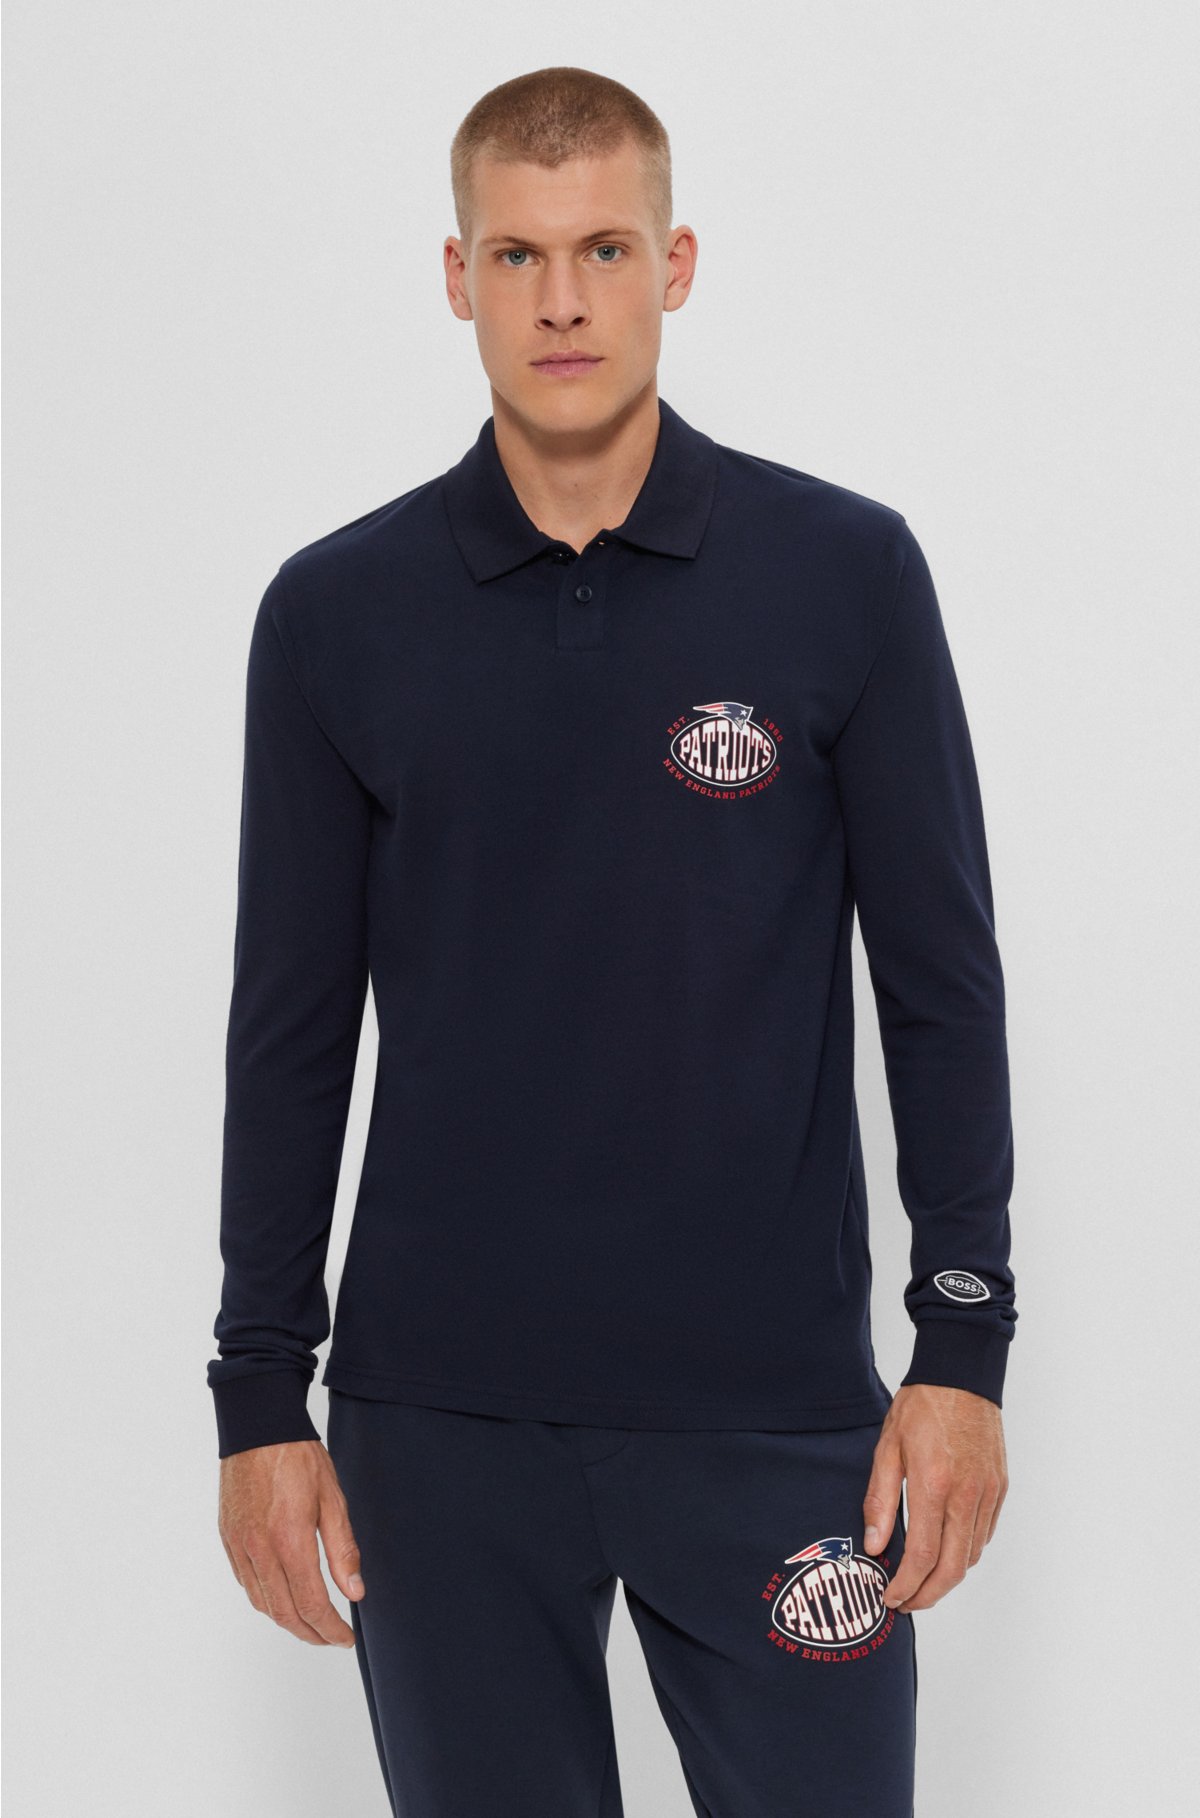 BOSS x NFL long-sleeved polo shirt with collaborative branding, Patriots